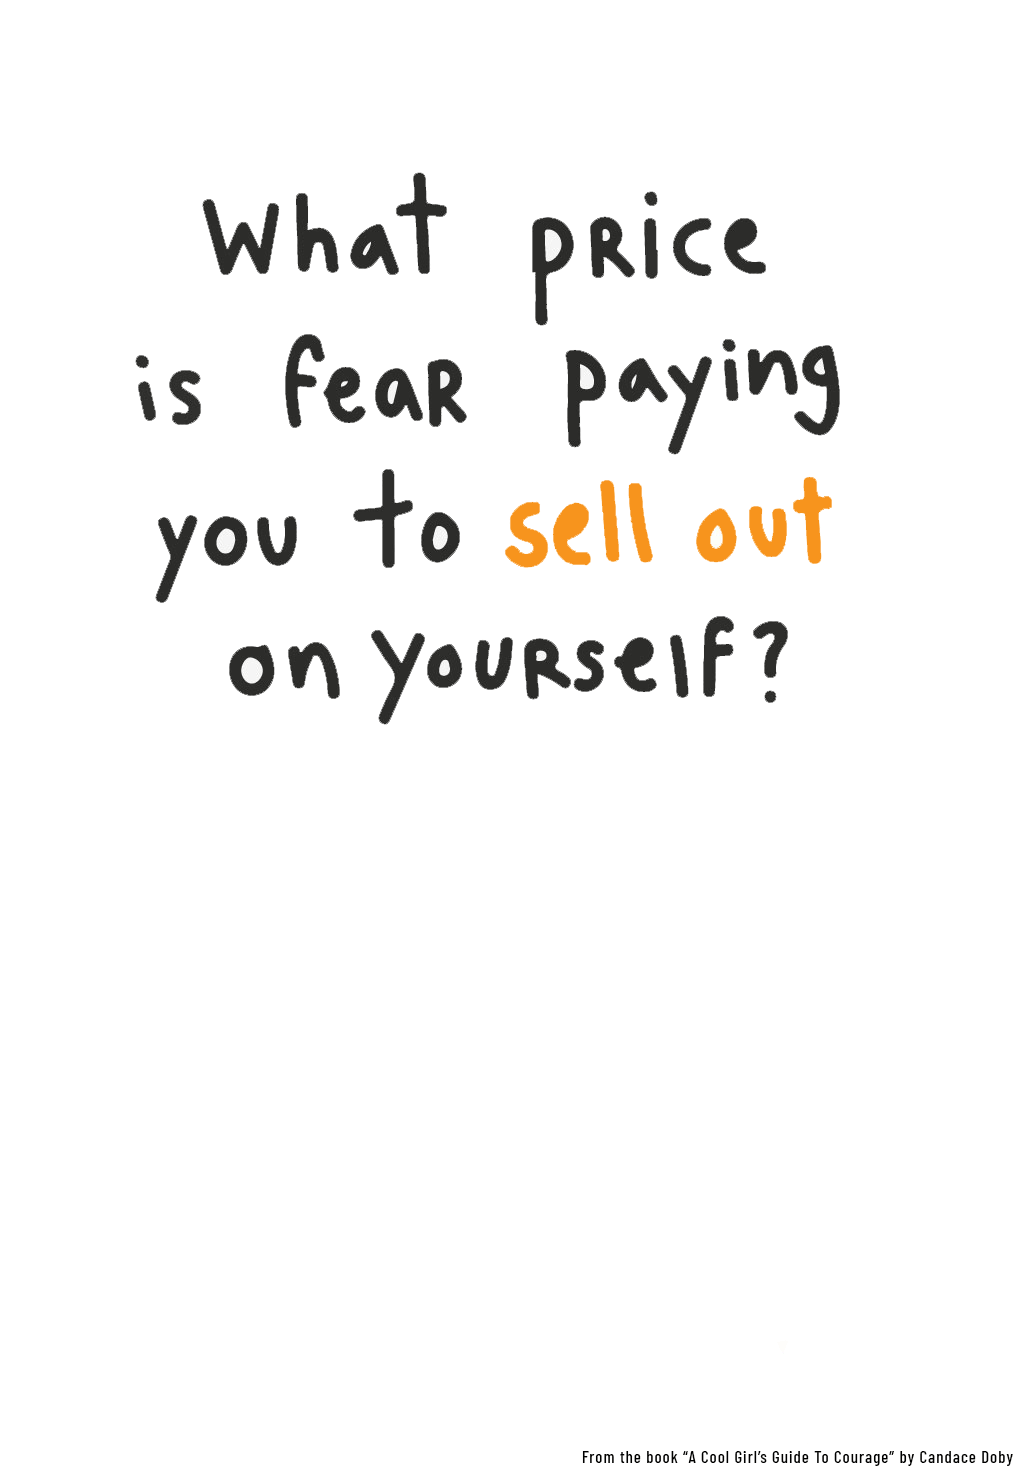 how much is fear paying you to sell out on yourself?